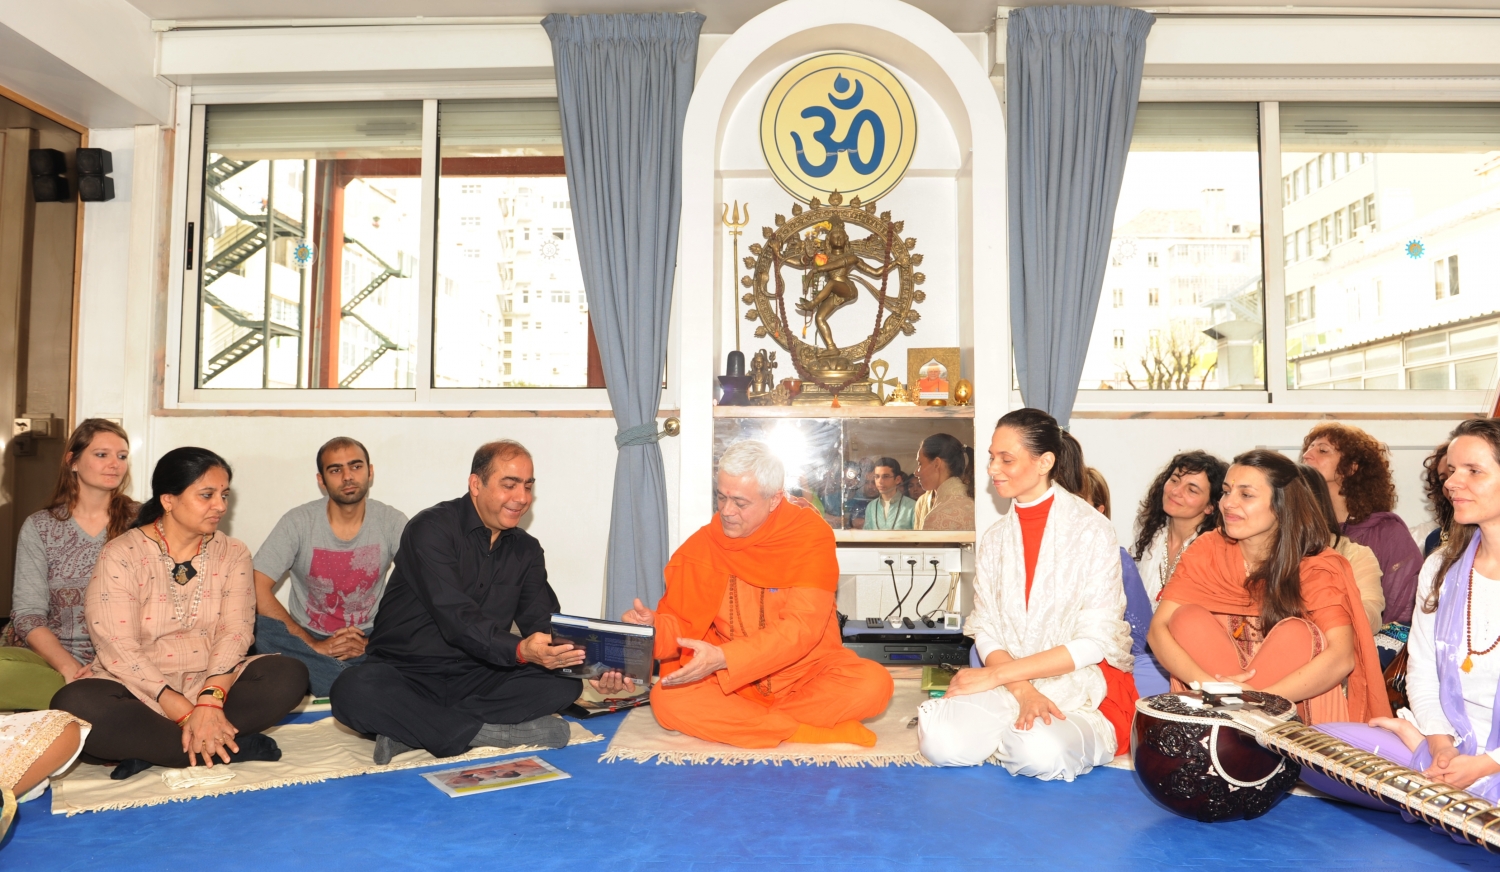 Visit of His Excellency Jitendra Natrh Misra - Ambassador of India in Portugal - at the Headquarters of the Portuguese Yoga Confederation, Lisboa – 2015